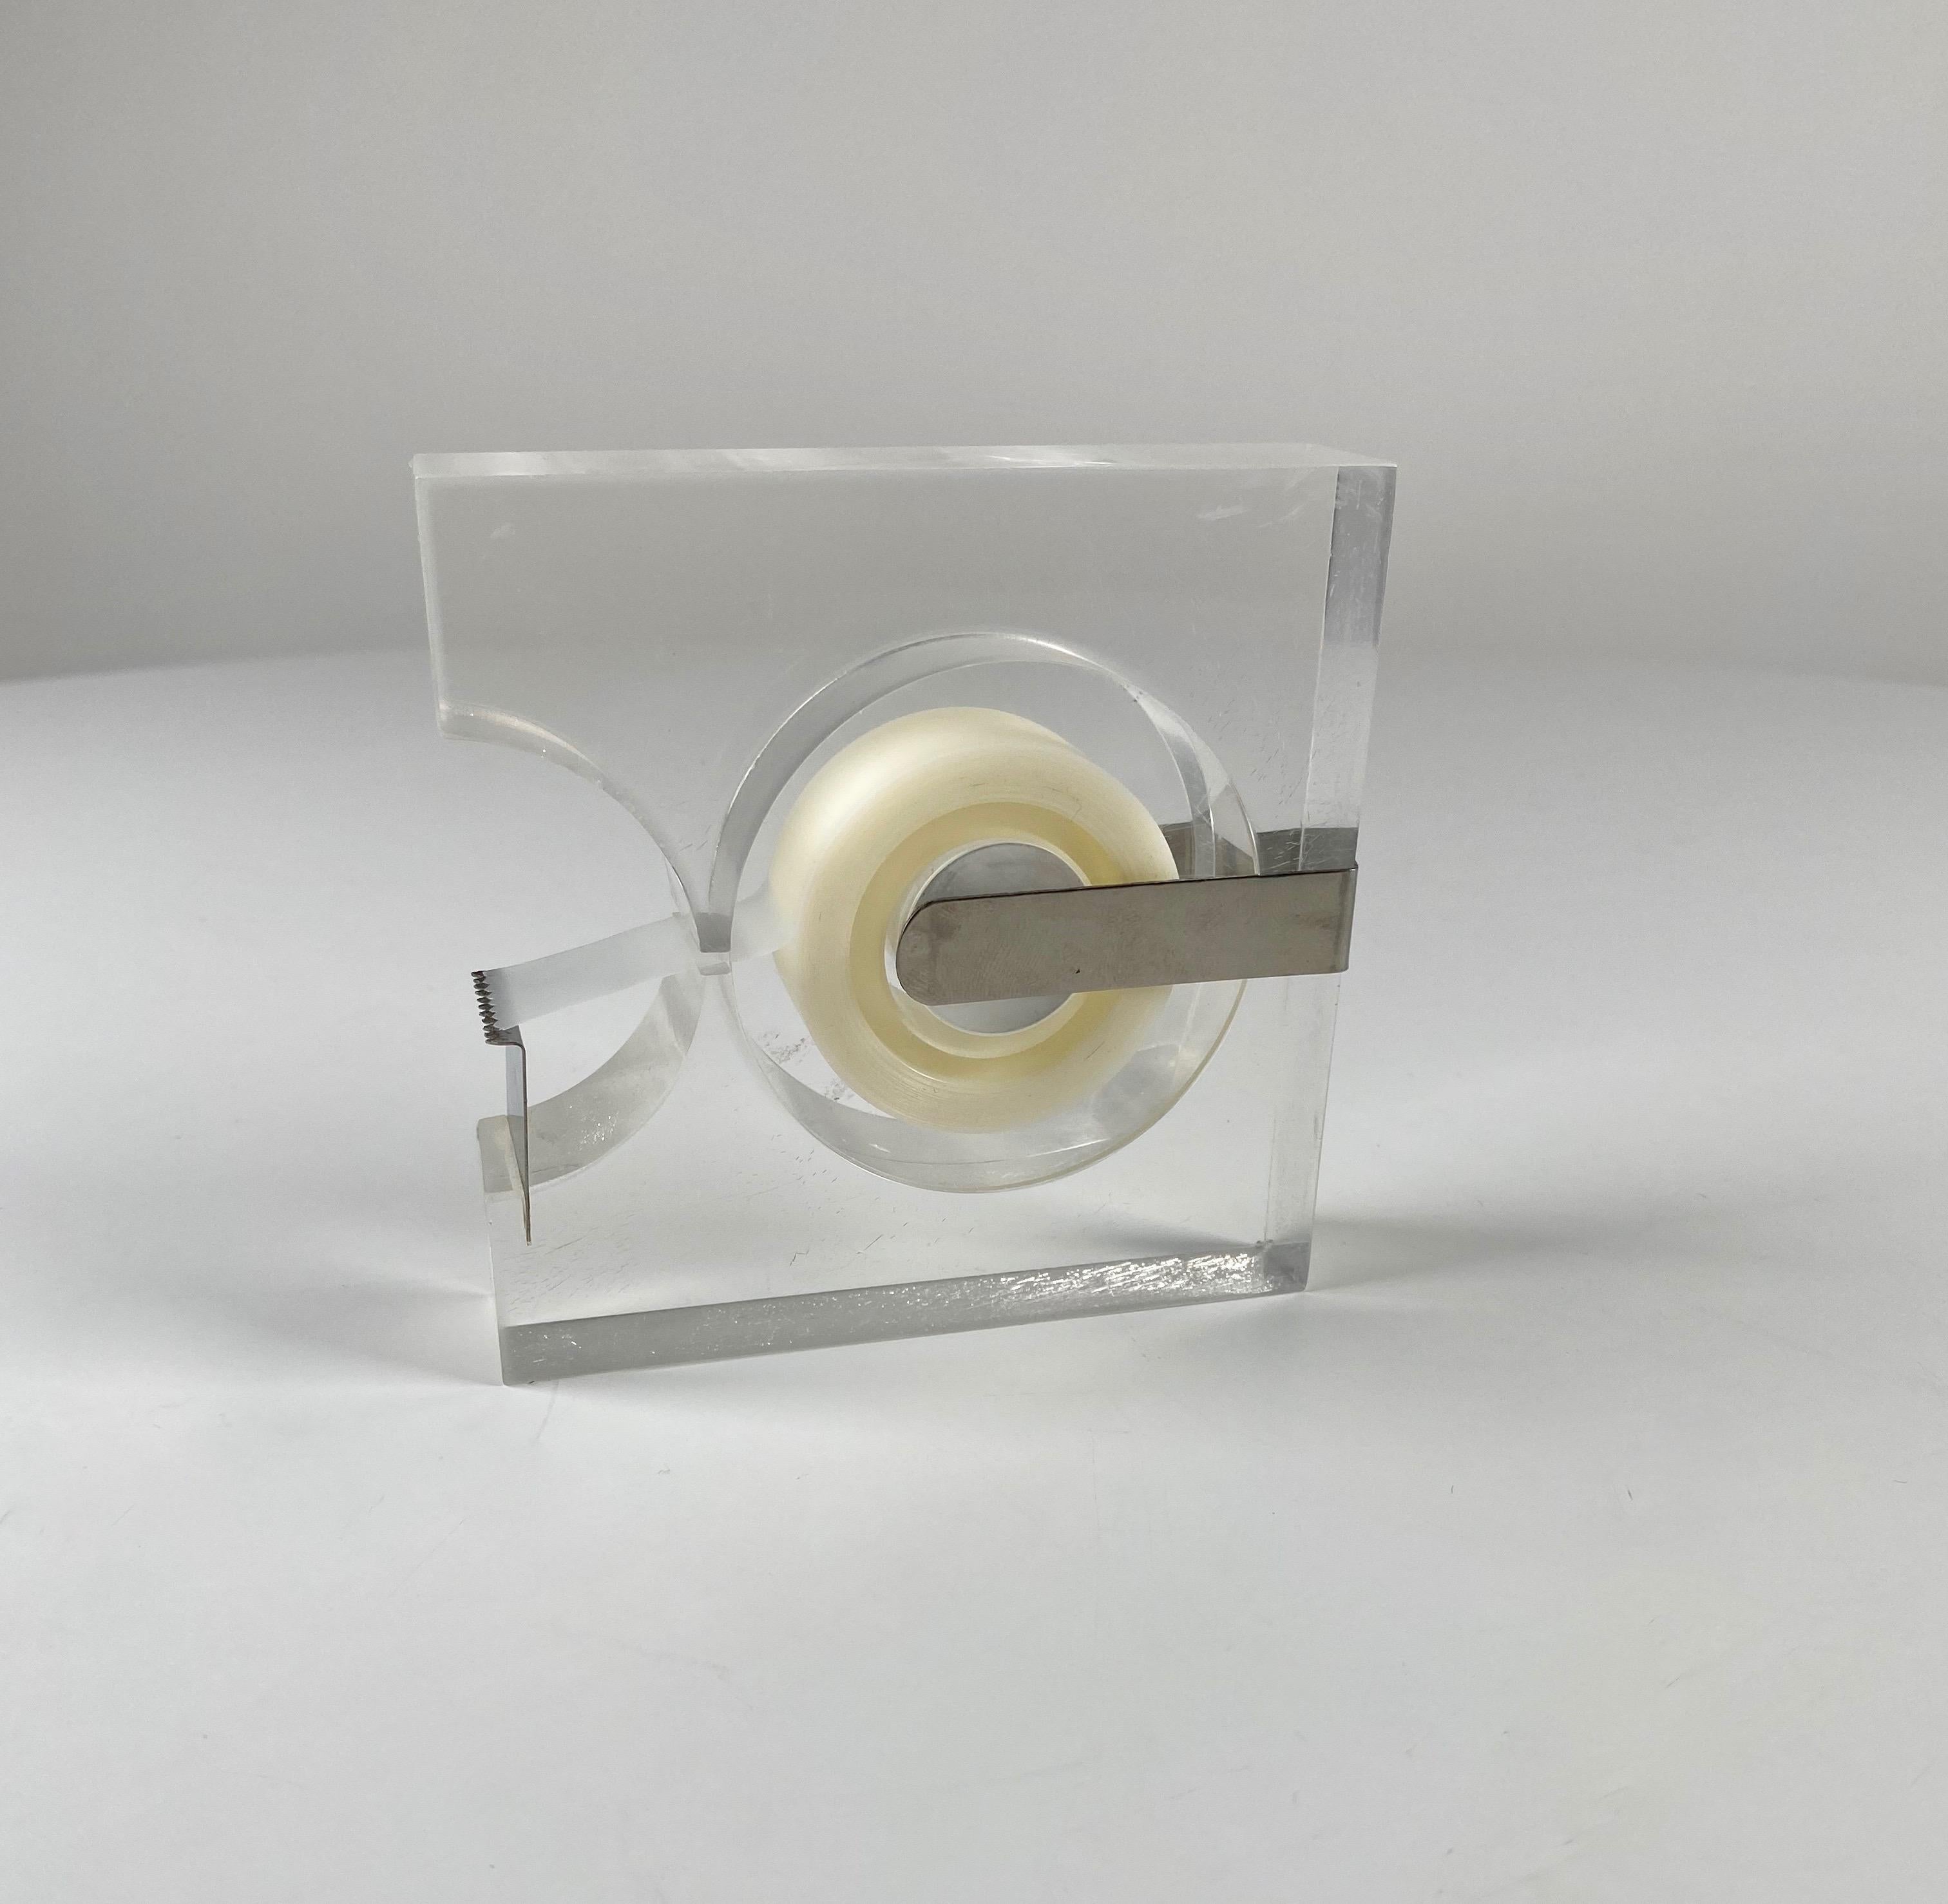 Lucite and chrome tape dispenser produced from (1963 to 1973) by Two's Company of Mount Vernon, New York. Created by Industrial Designer Robert P. Gottlieb, this dispenser was part of the MoMA, NY Design Study Collection. Constructed of a solid